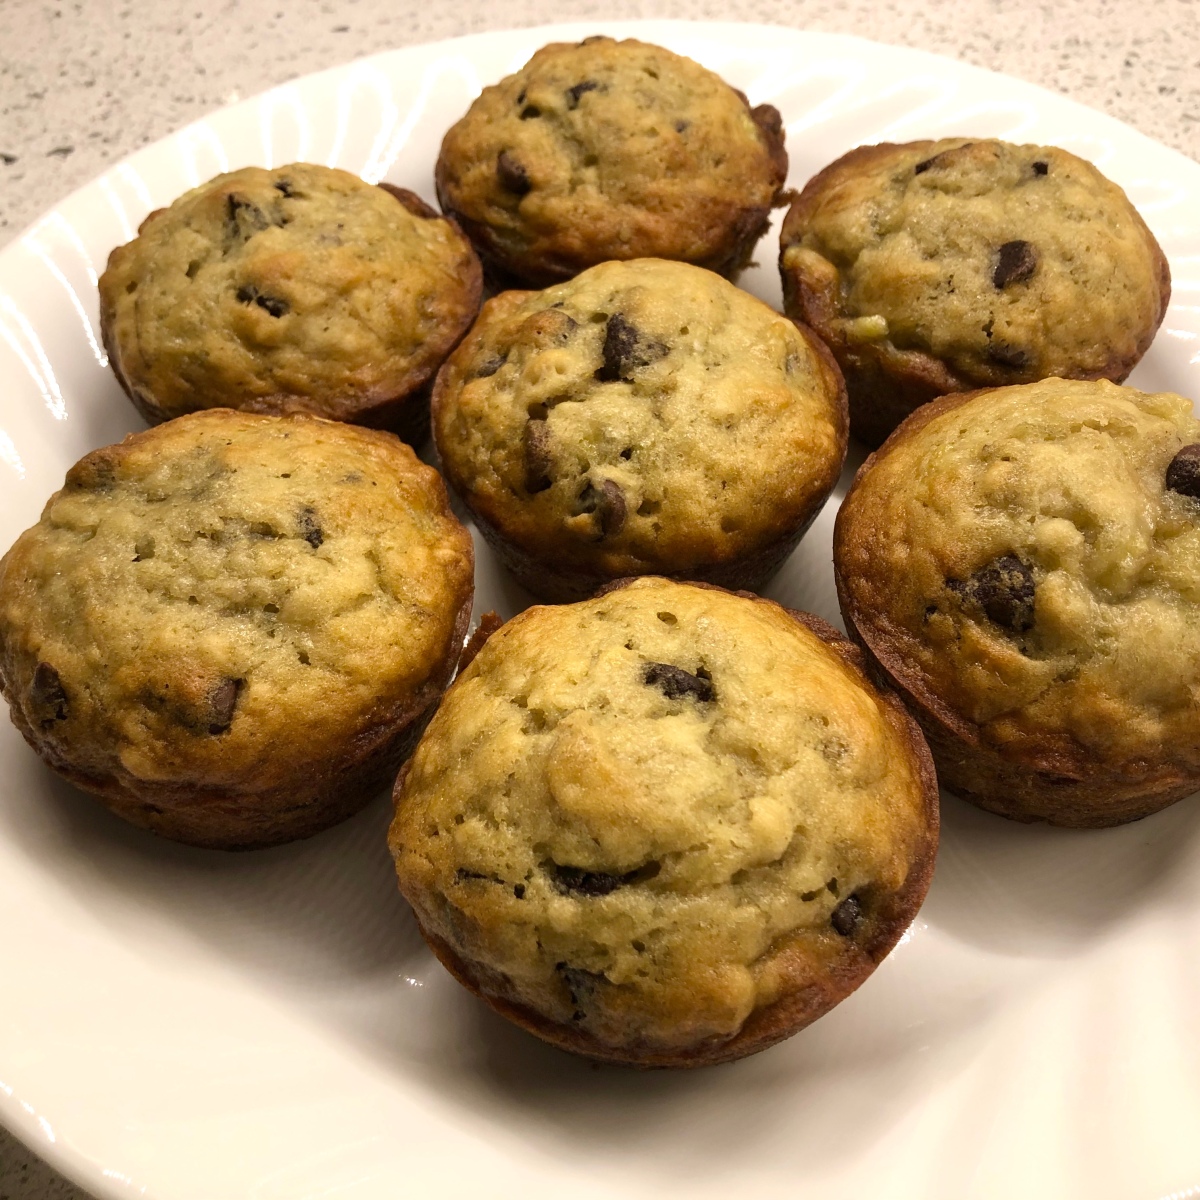 The Simplest Recipe I’ve Ever Made: Banana Chocolate Chip Muffins